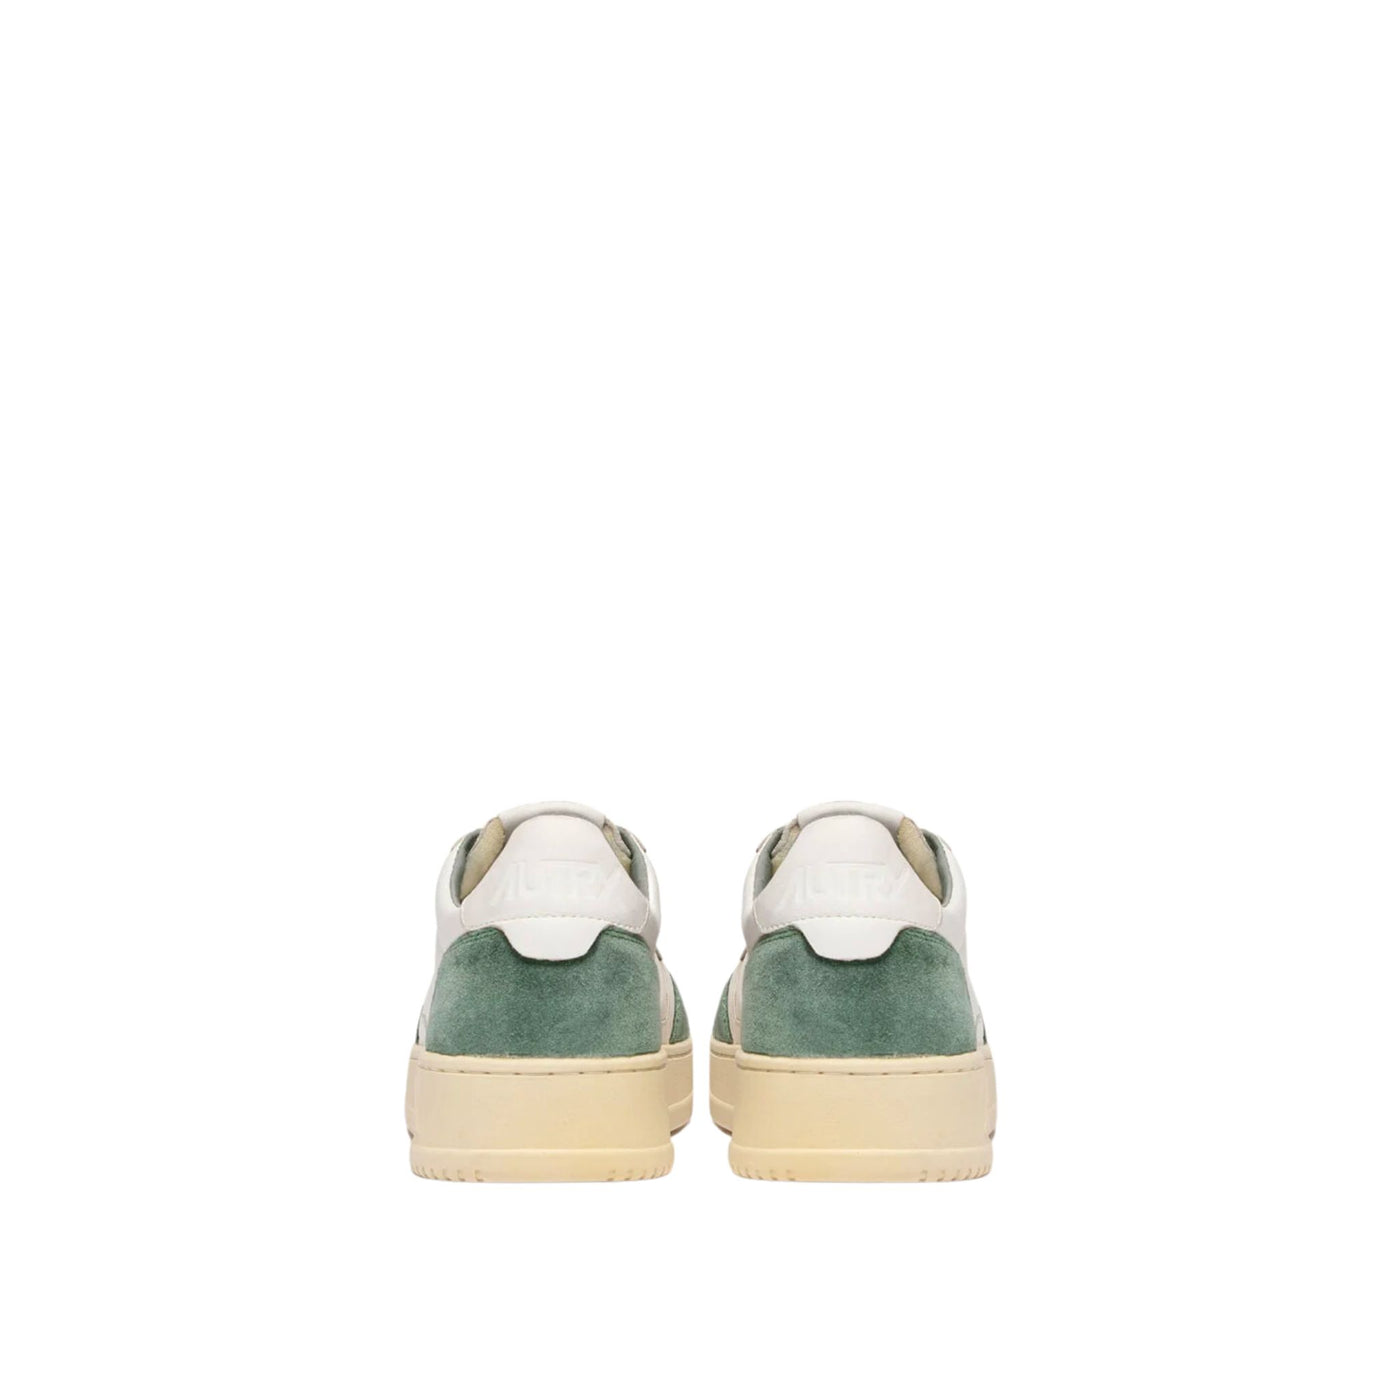 Medalist men's sneakers in white and teal suede